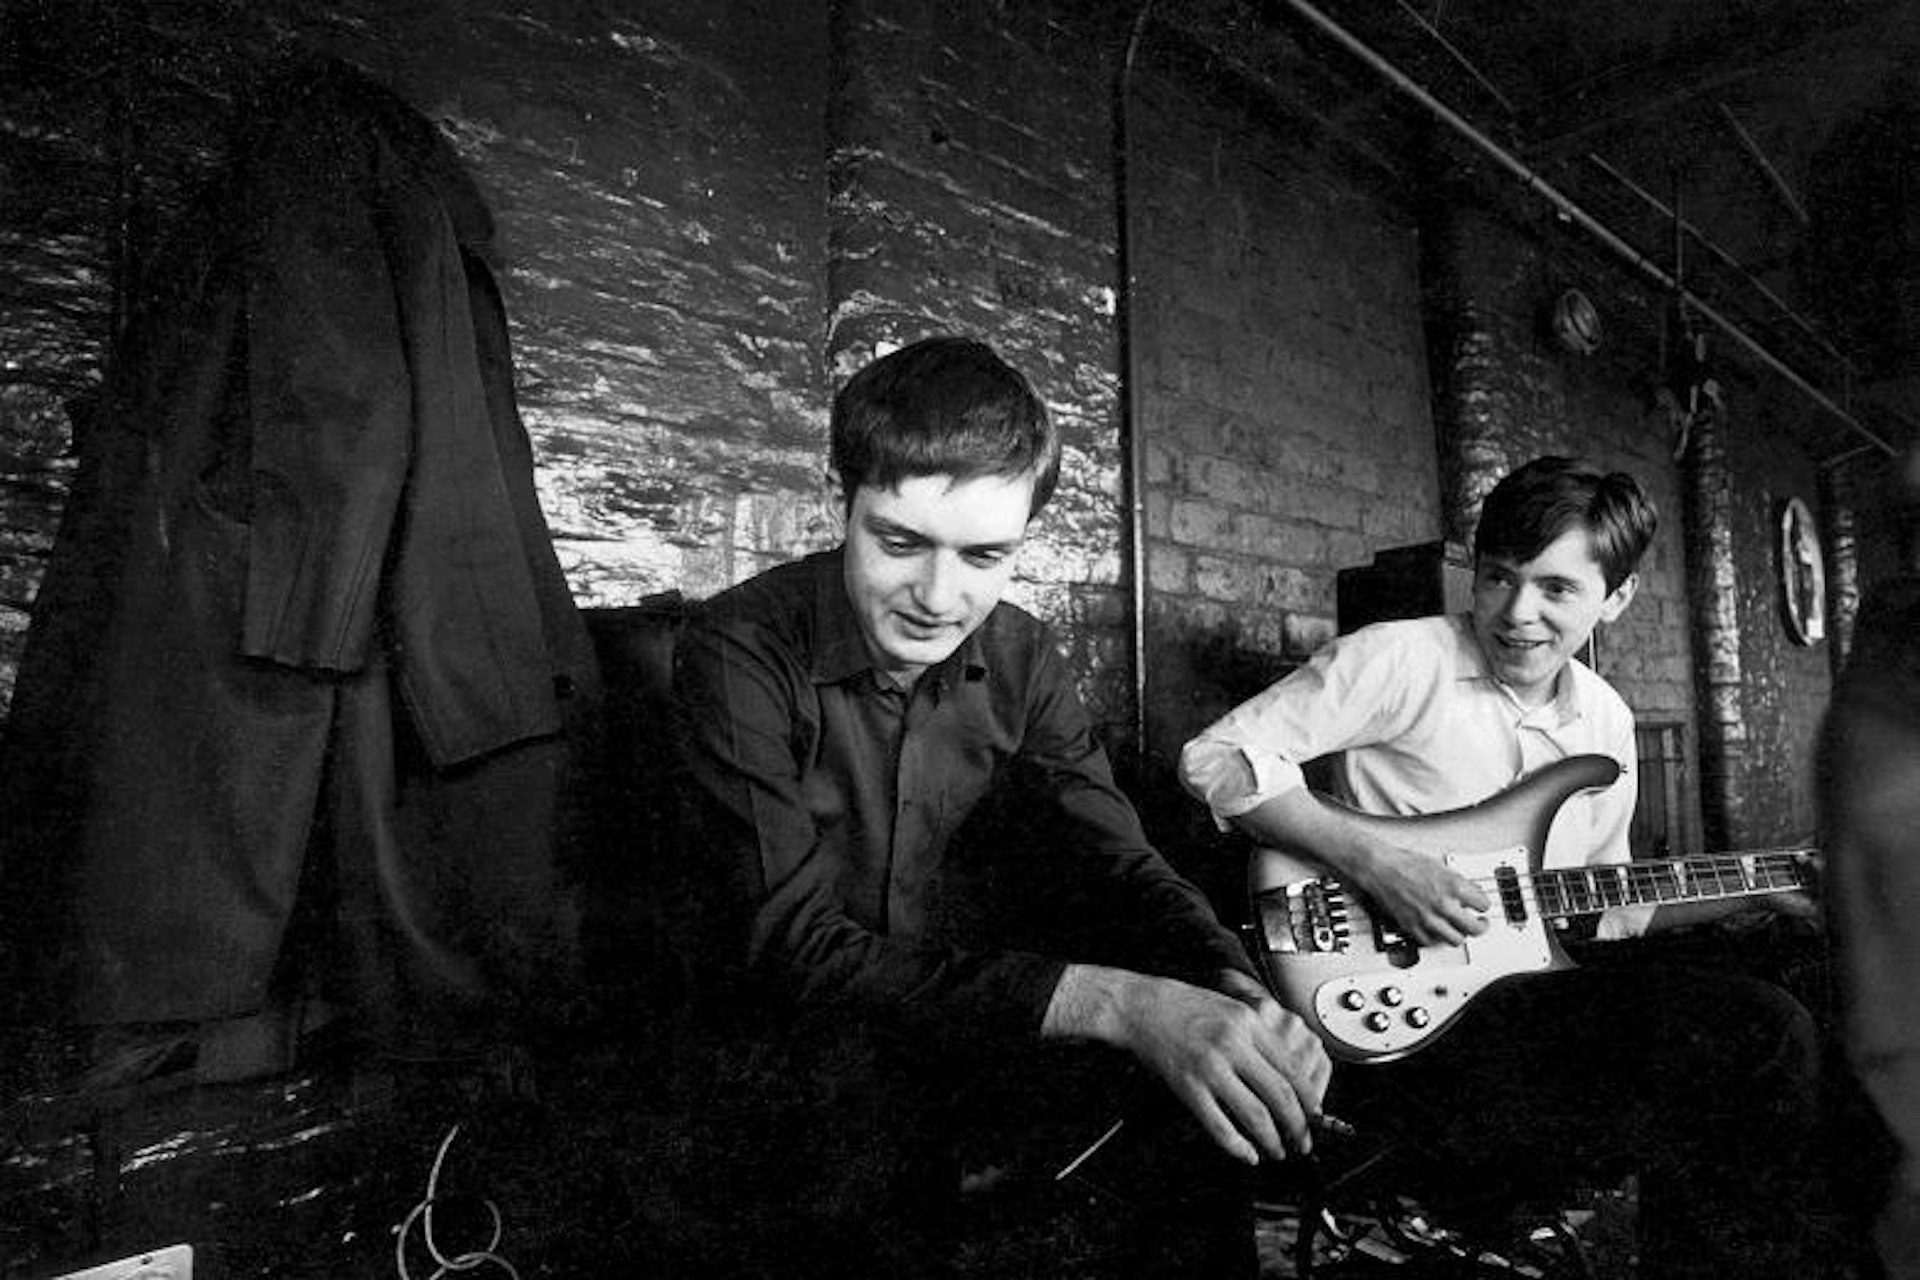 Five of the best ways to remember Joy Division frontman Ian Curtis